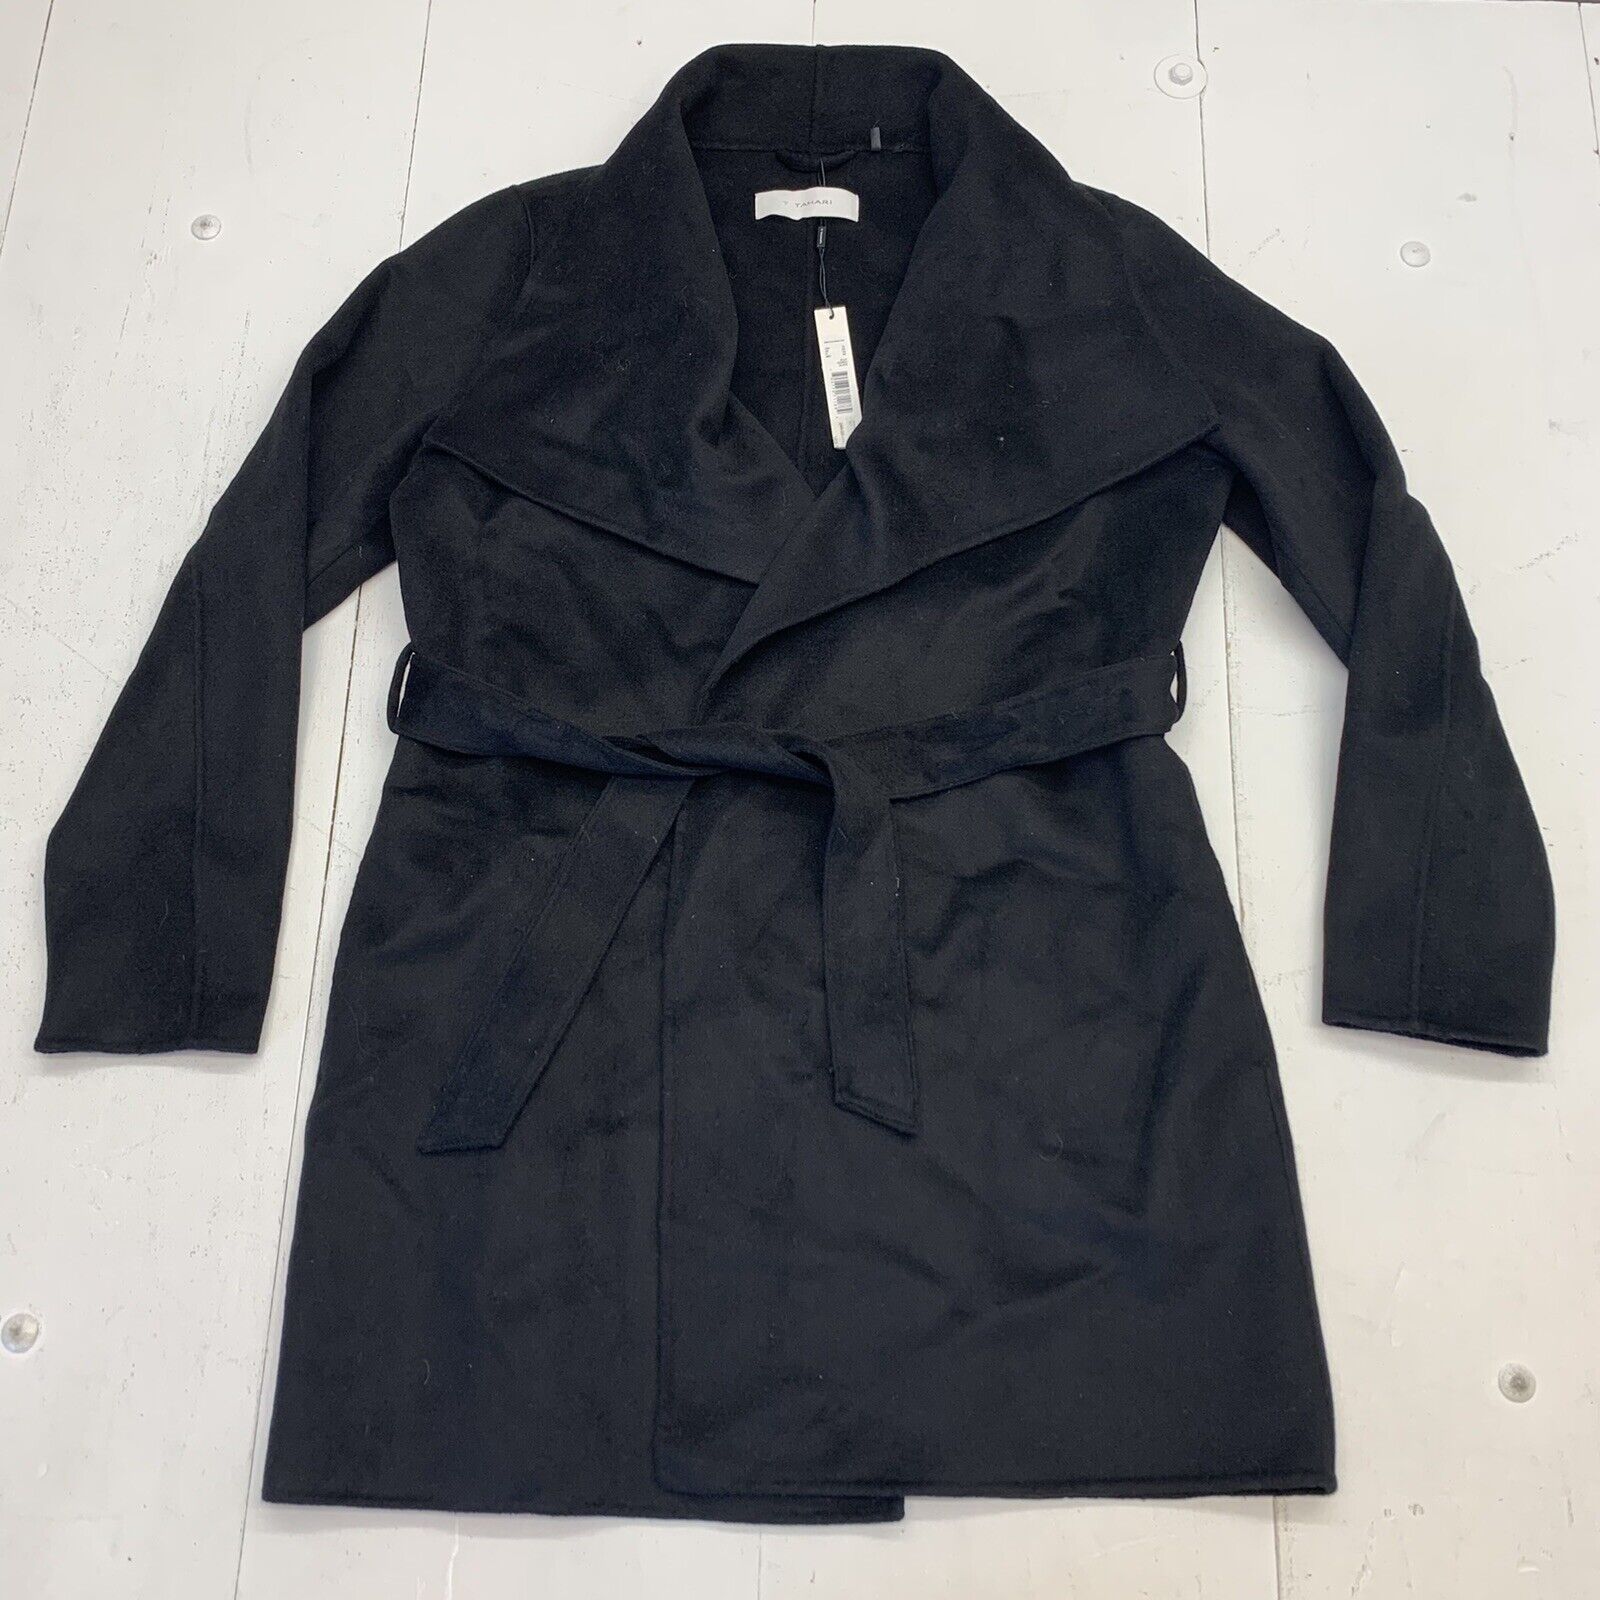 Tahari Womens Black Belted Over Coat size XL